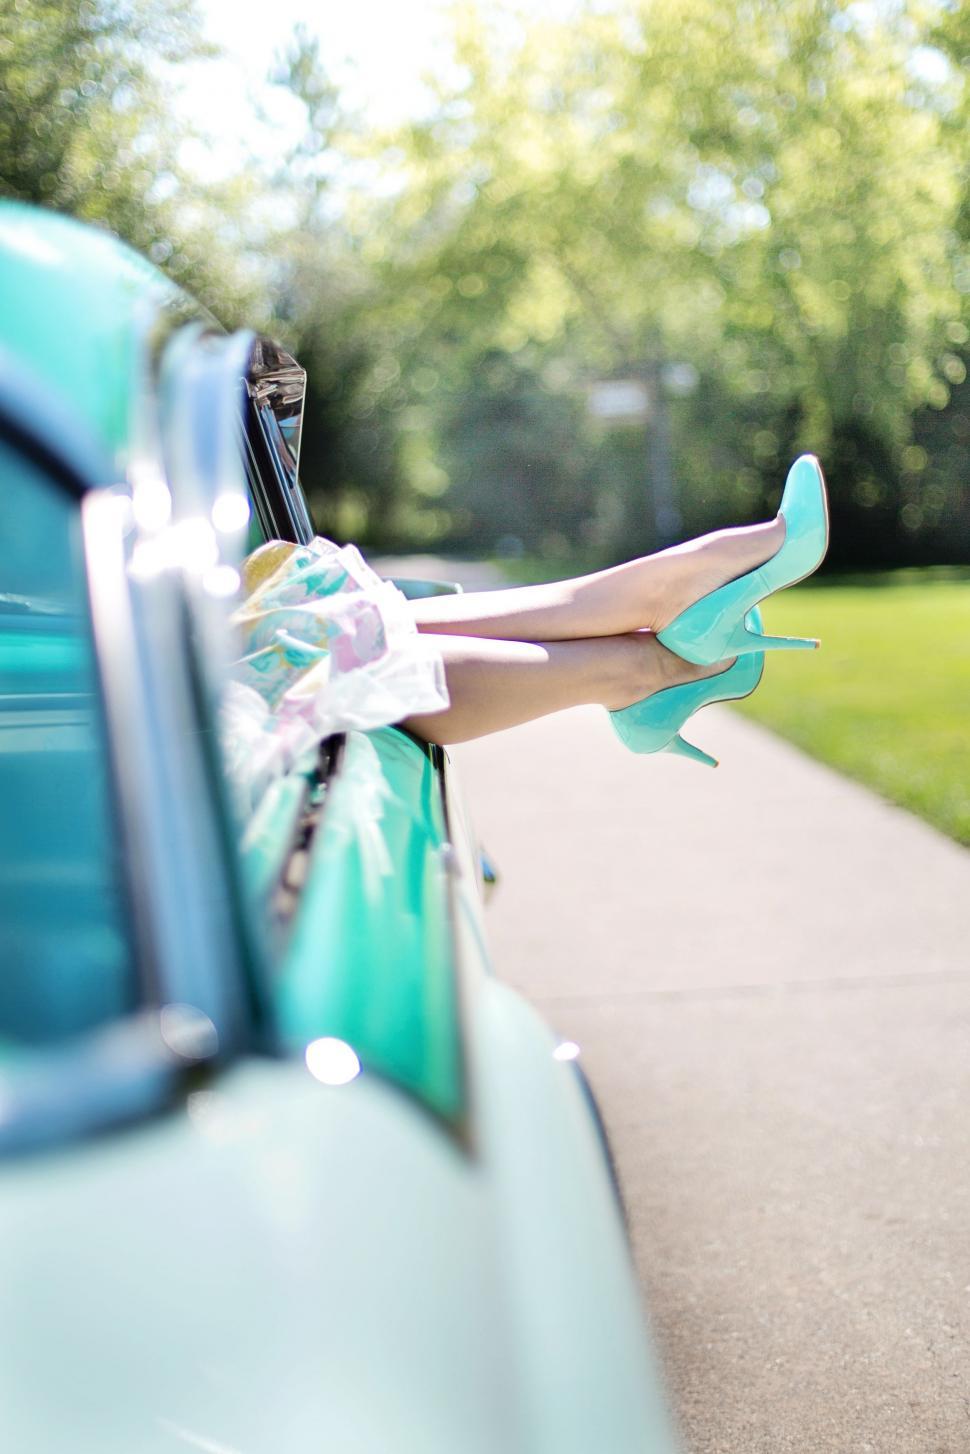 Free Image of Turquoise car and woman legs 